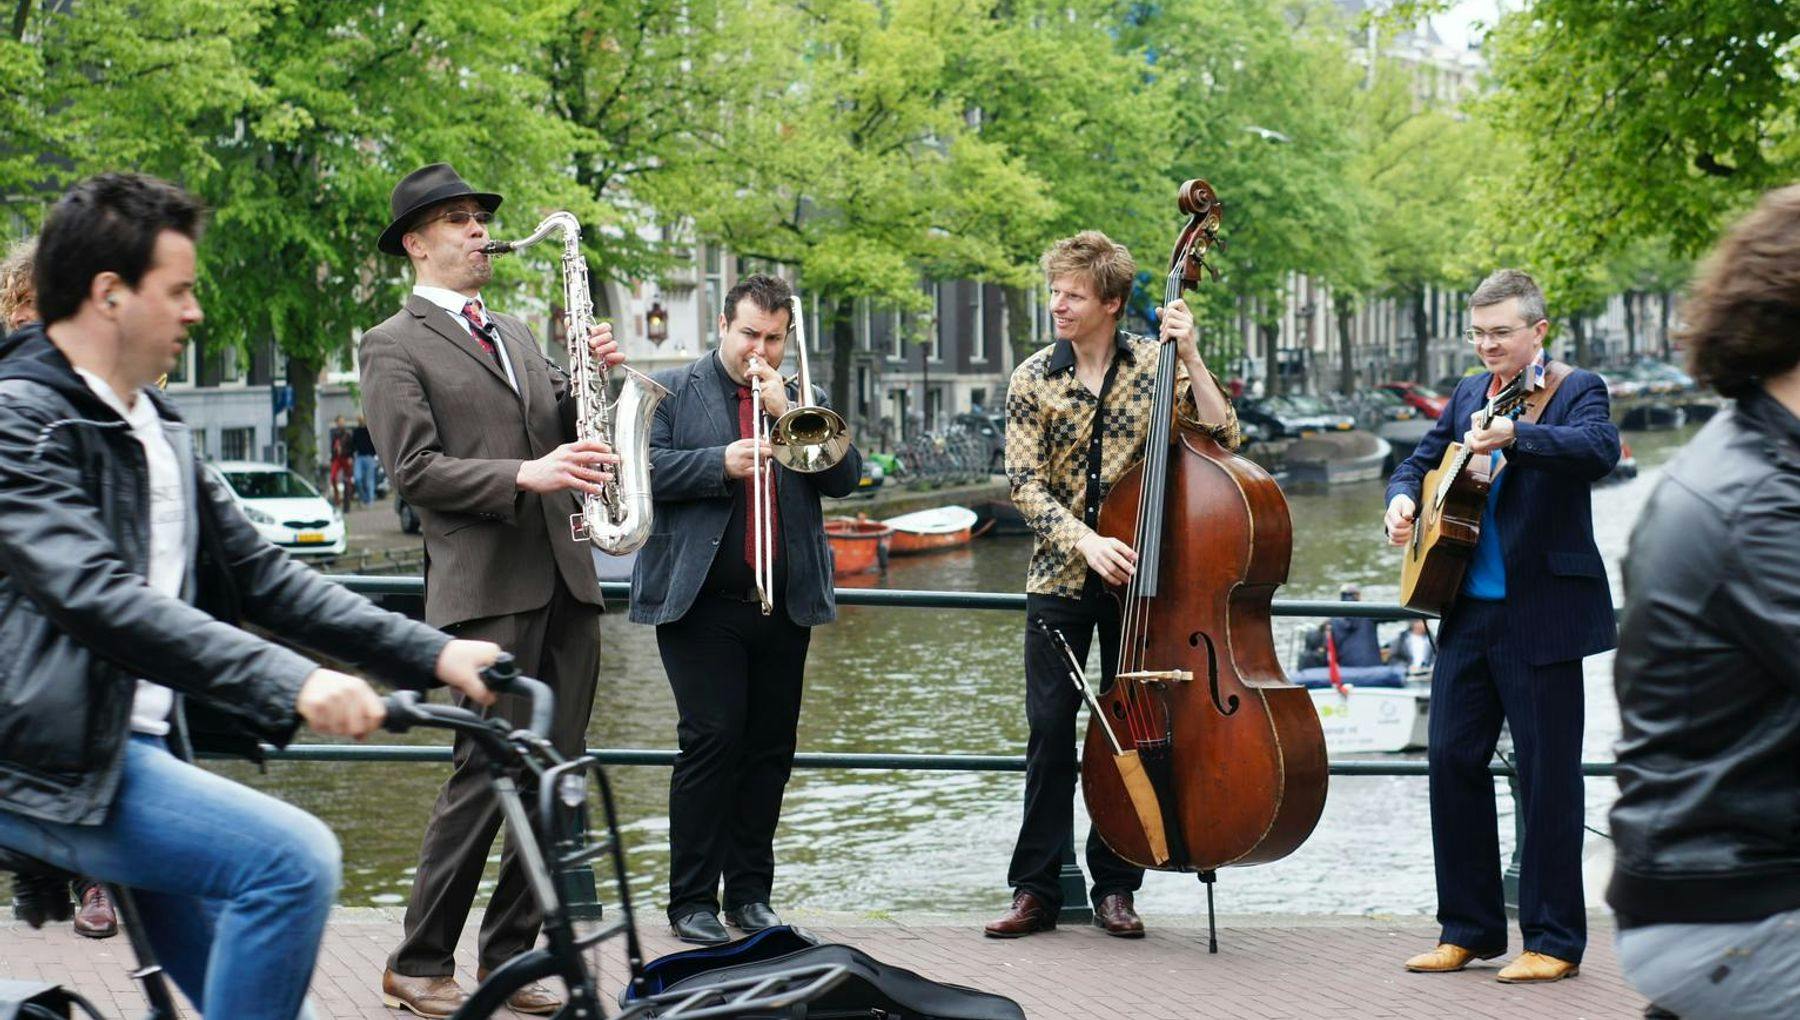 Jazz musicians playing on a bridge over the canal.